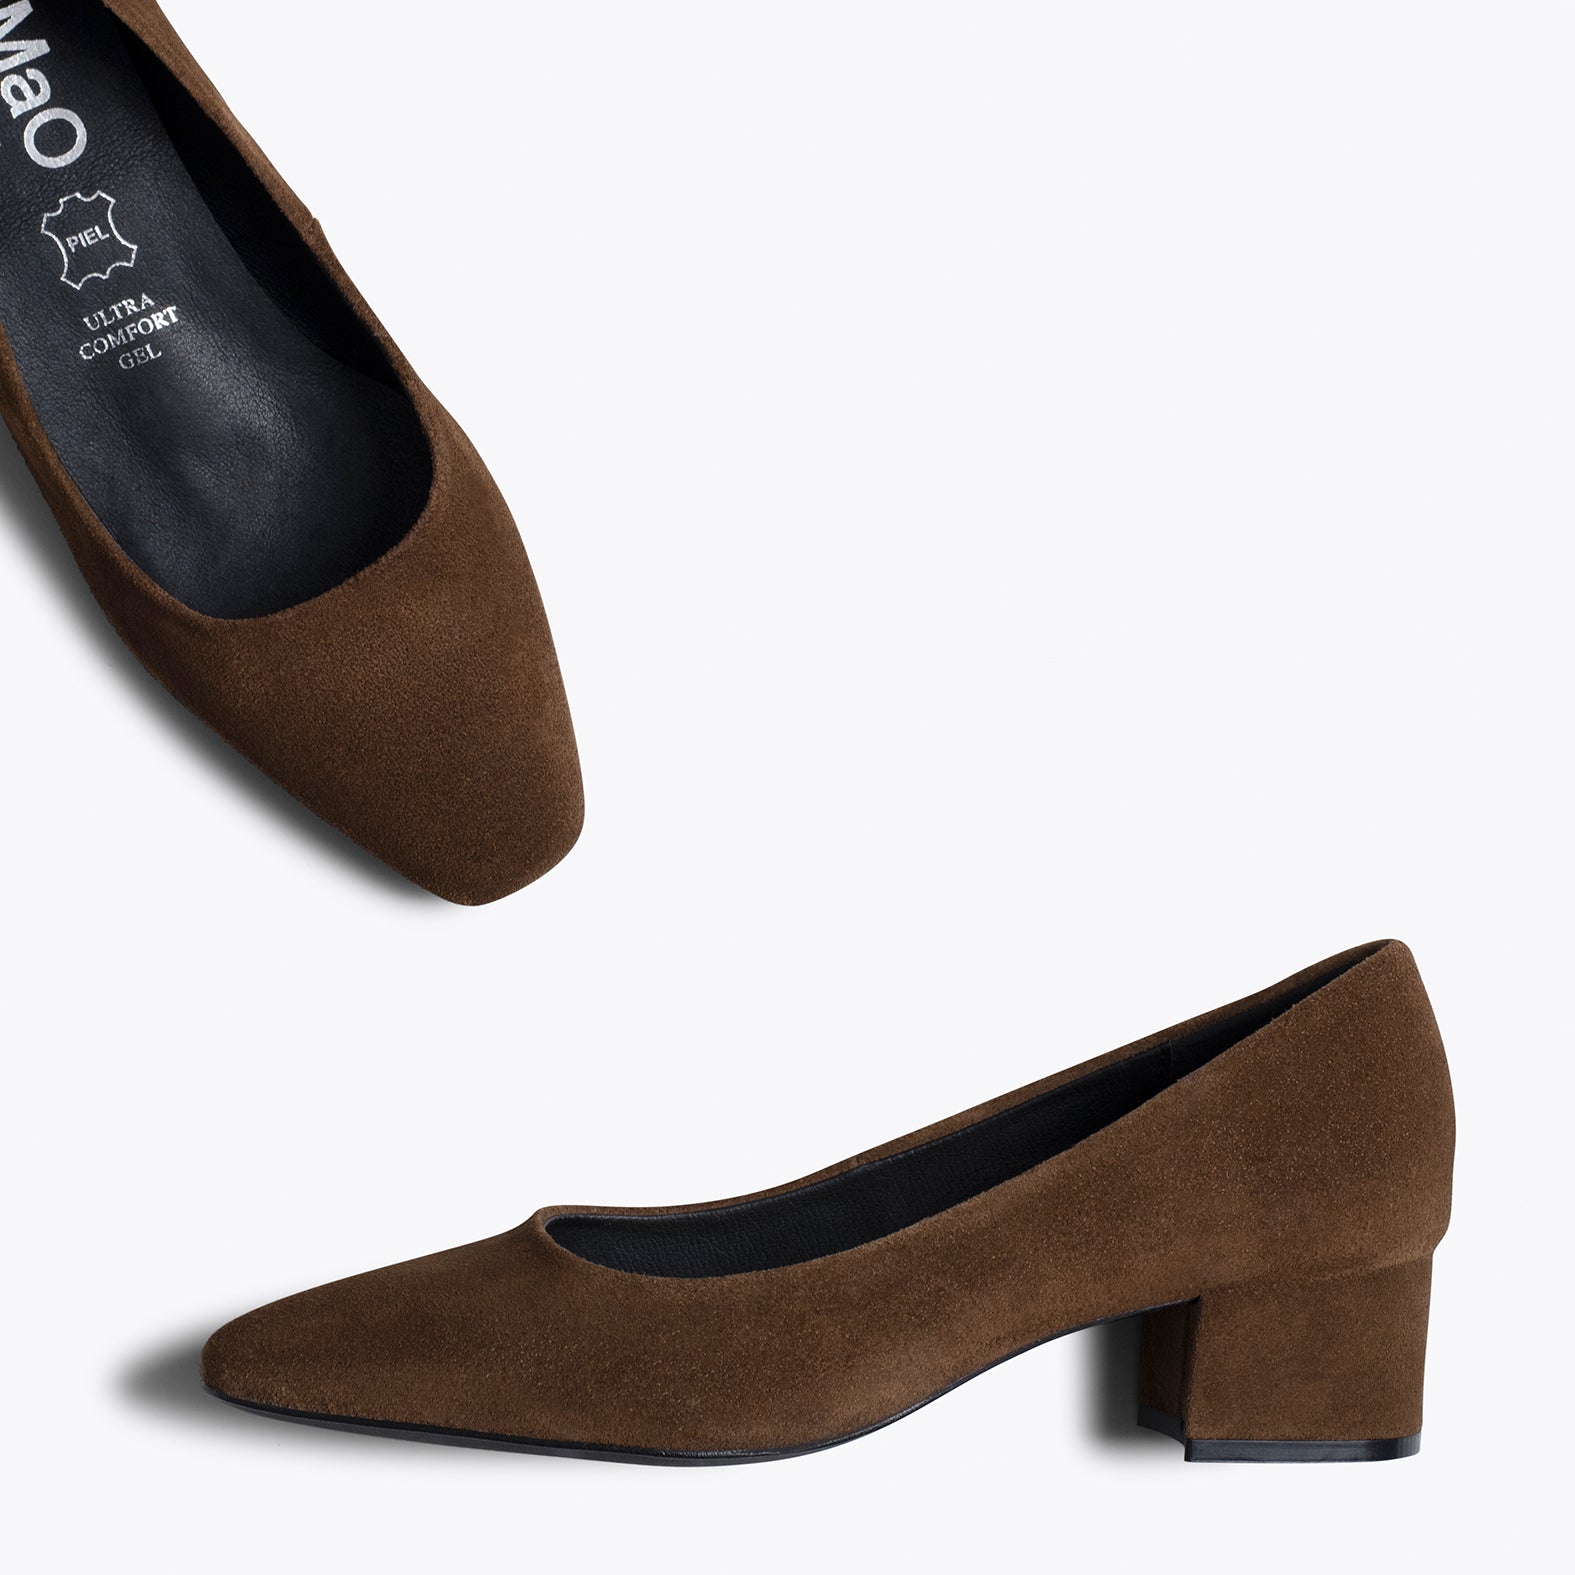 TREND – BROWN square pointed mid heel